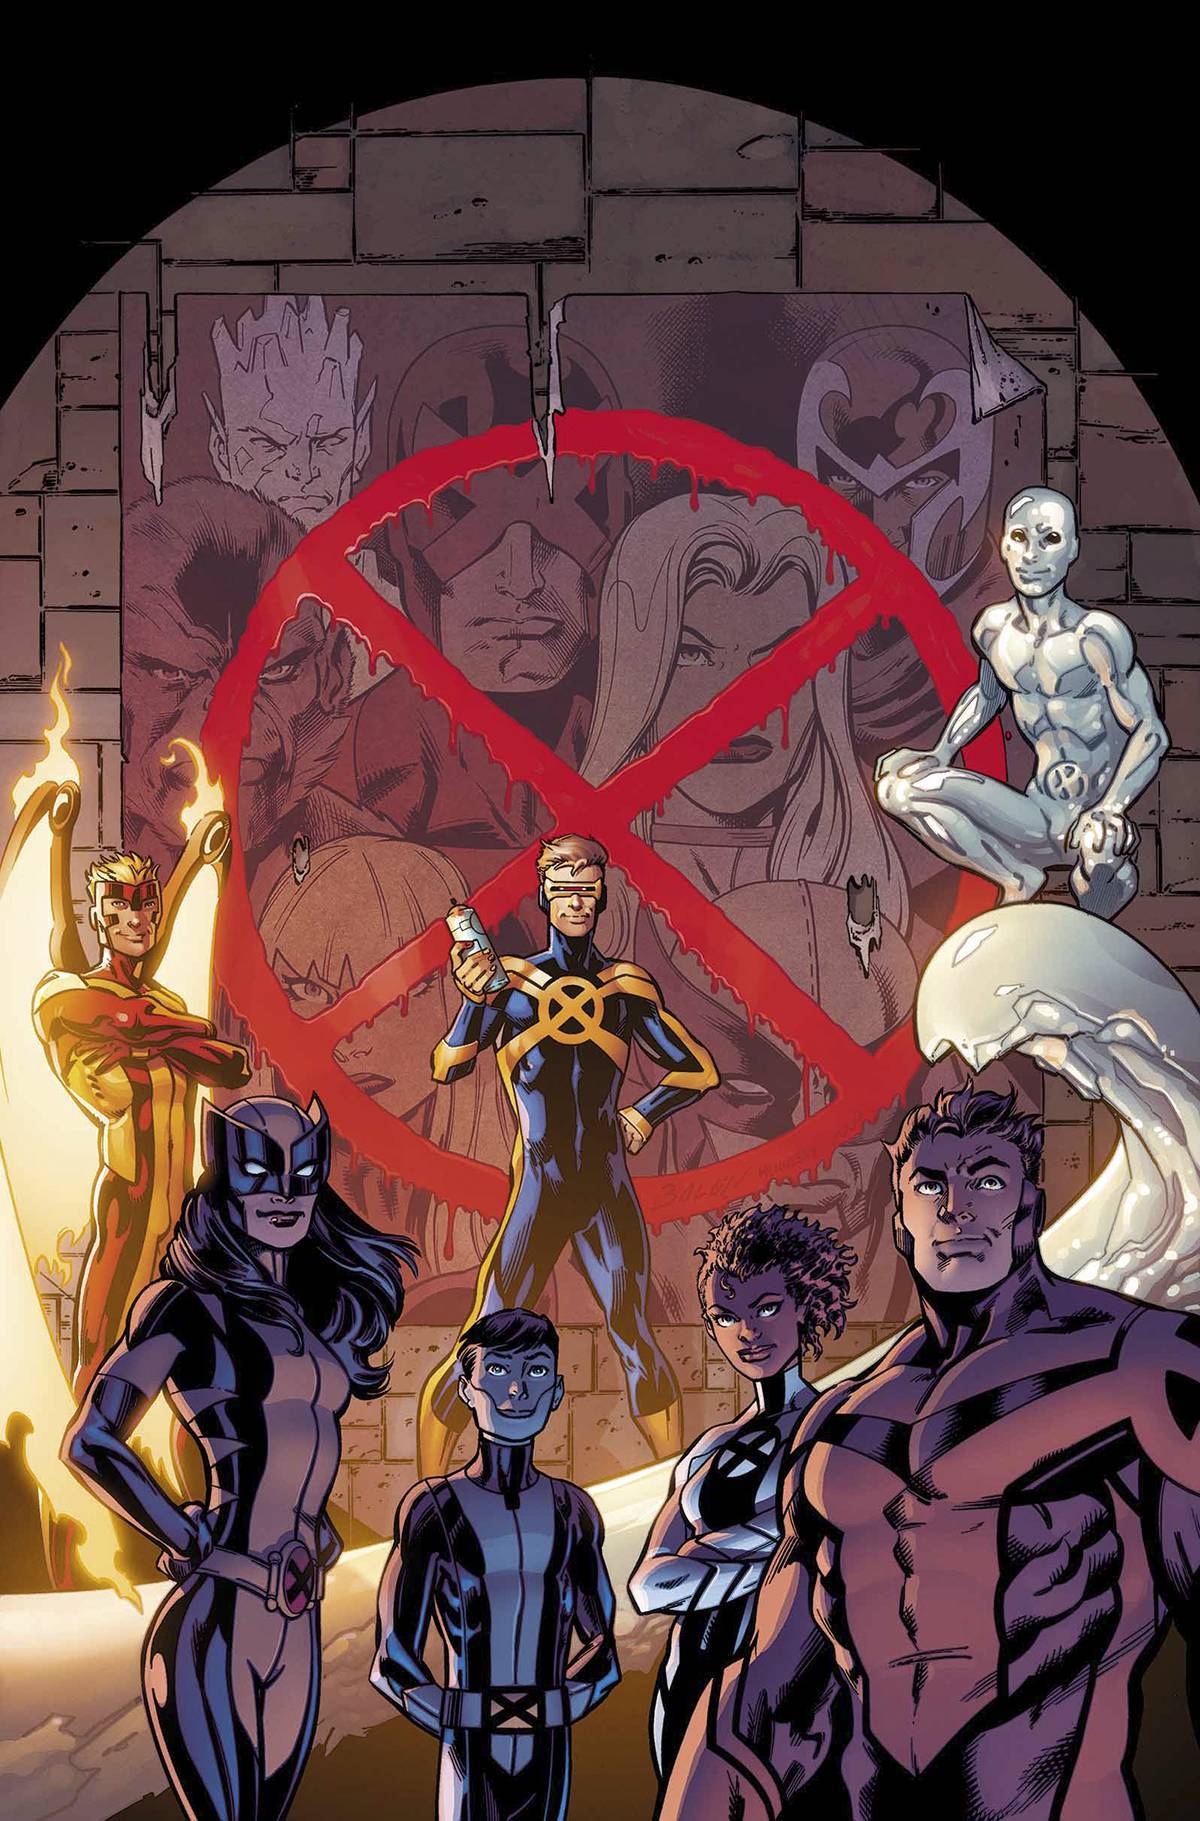 Even as the world turns against them, six idealistic young mutants launch a last-ditch effort to change the future! Look for Marvel’s All New X-Men #1, out Wednesday at Curious Comics!